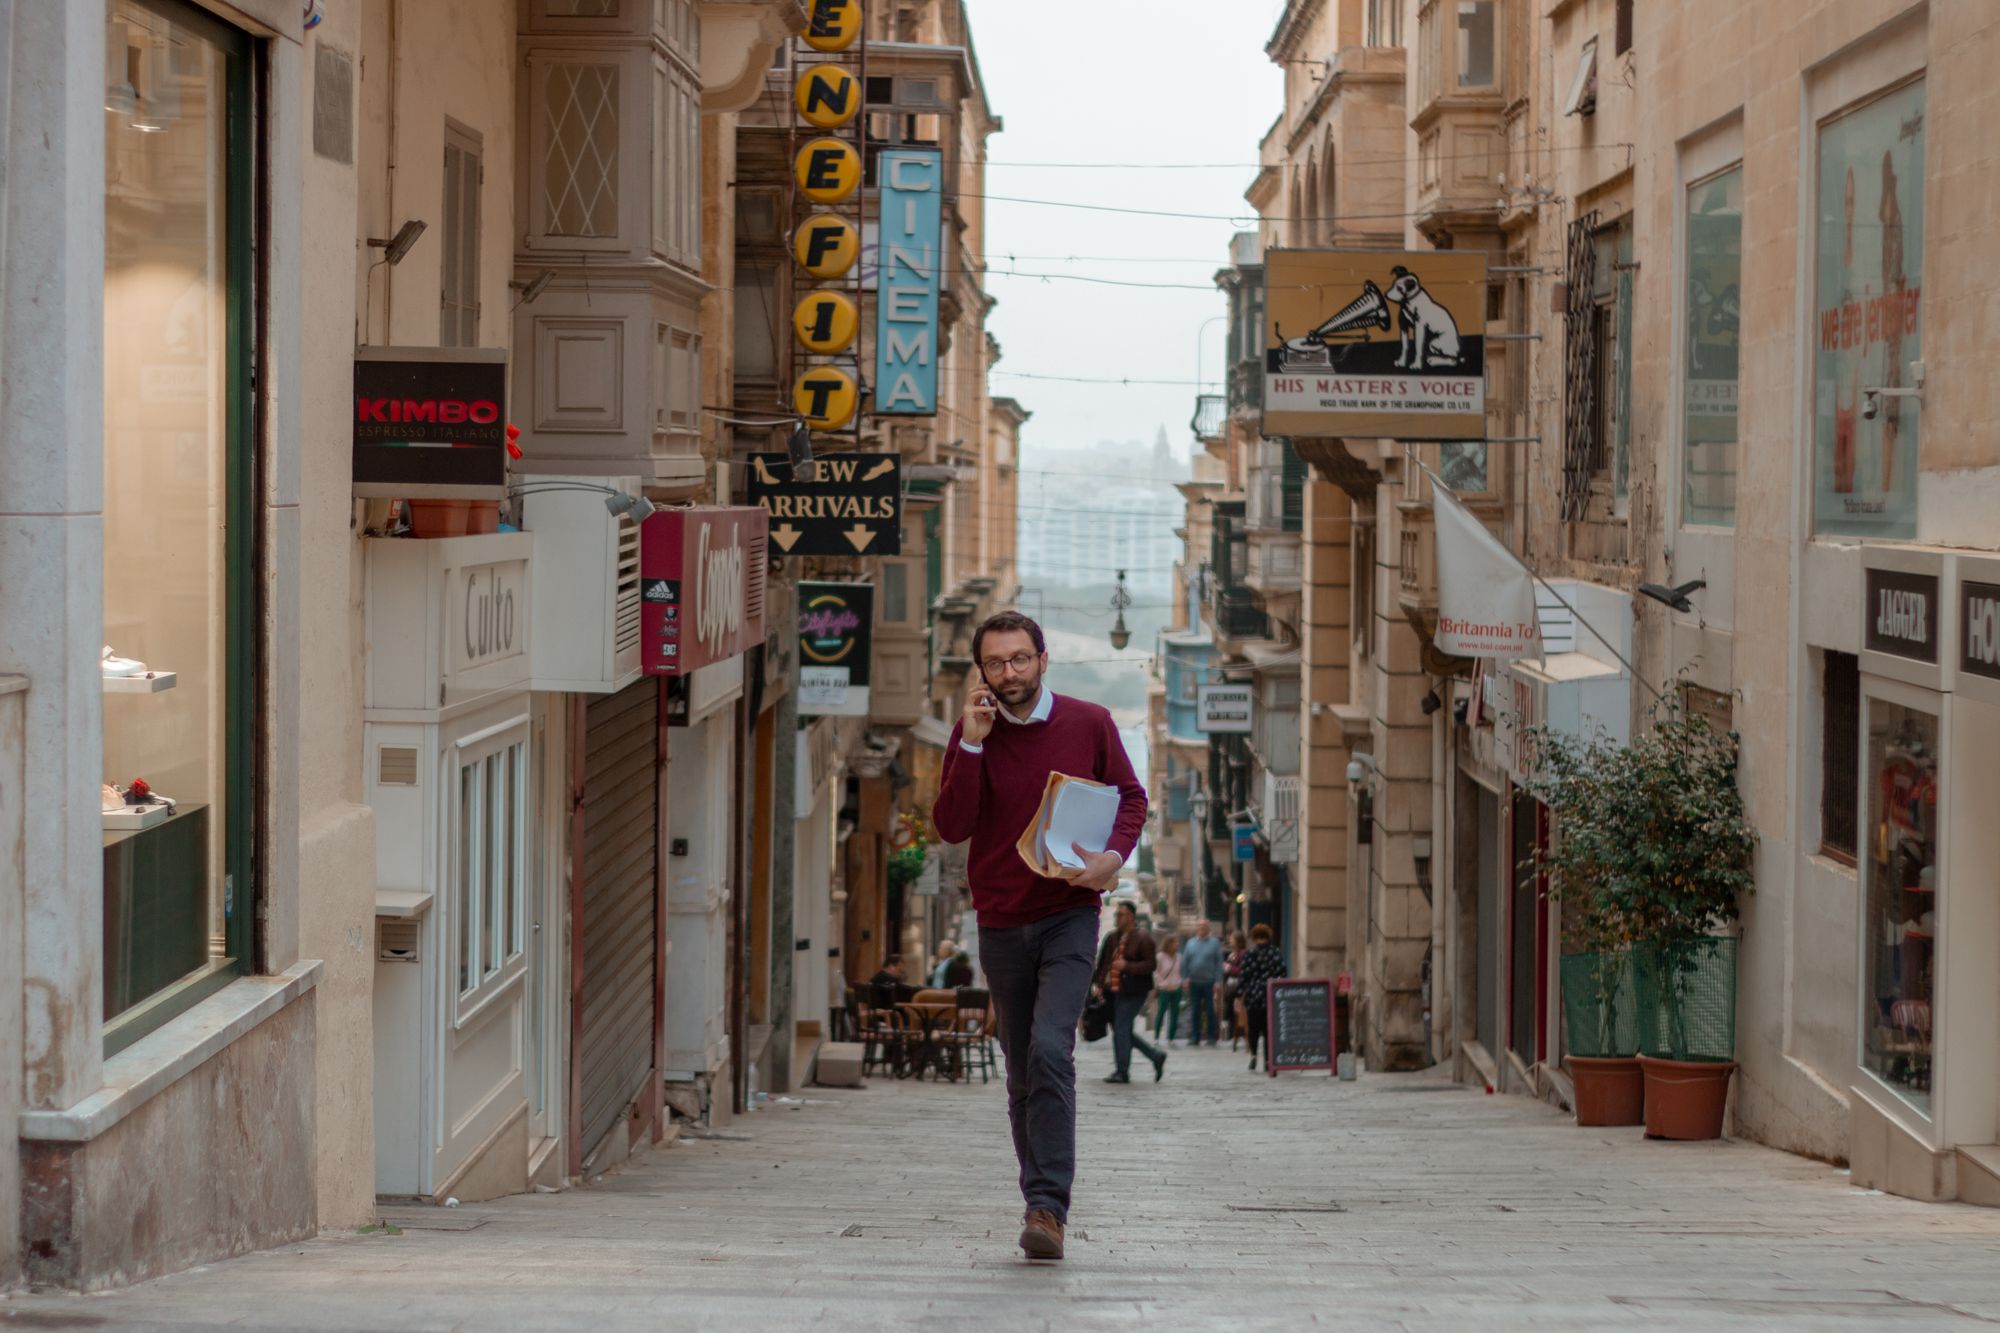 A man walking while talking to someone over his phone in Malta: A photo by David Elikwu